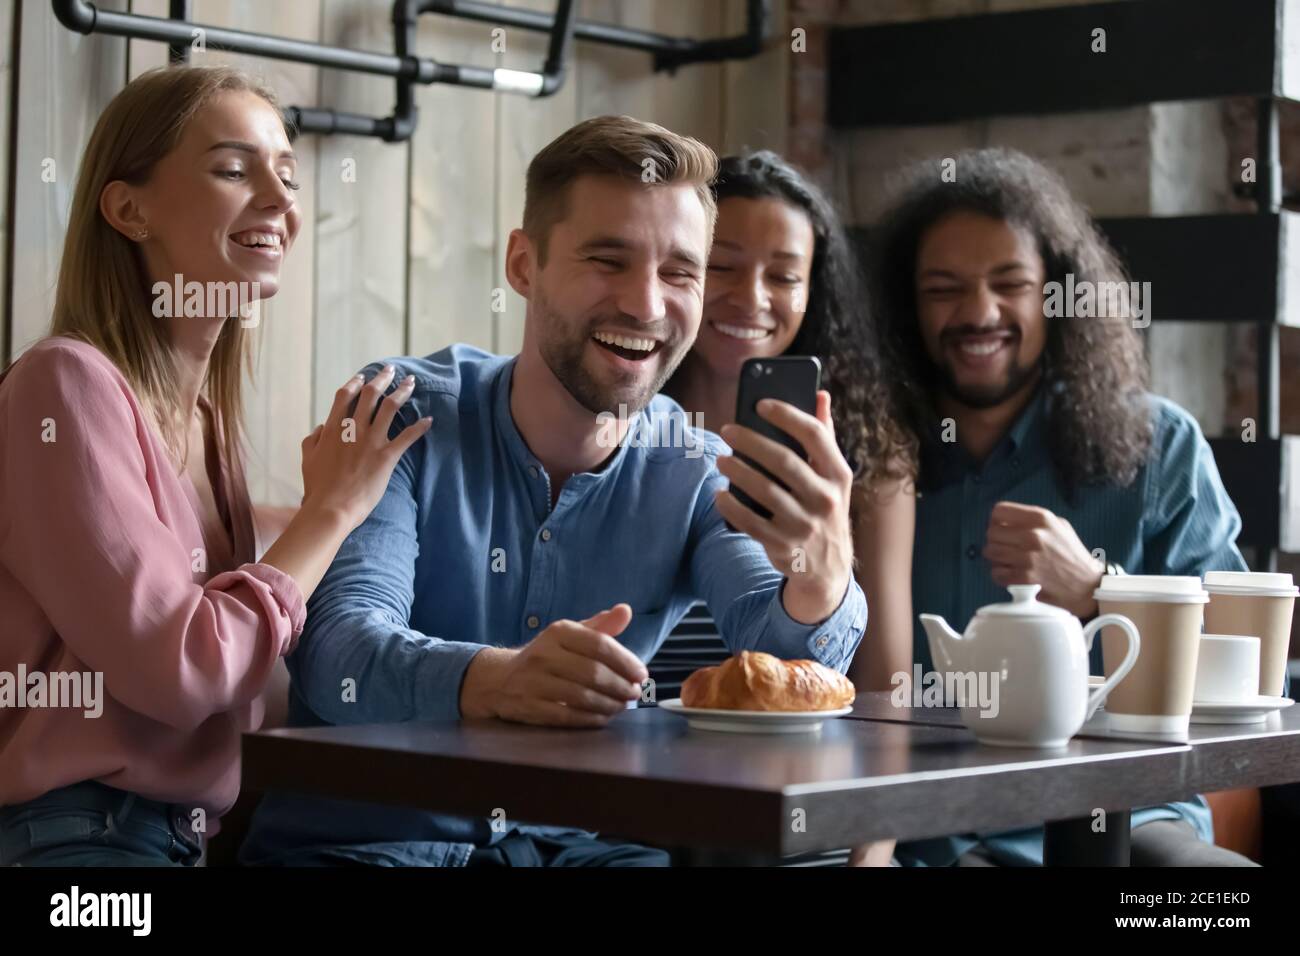 Overjoyed diverse people posing for photo in cafe together Stock Photo